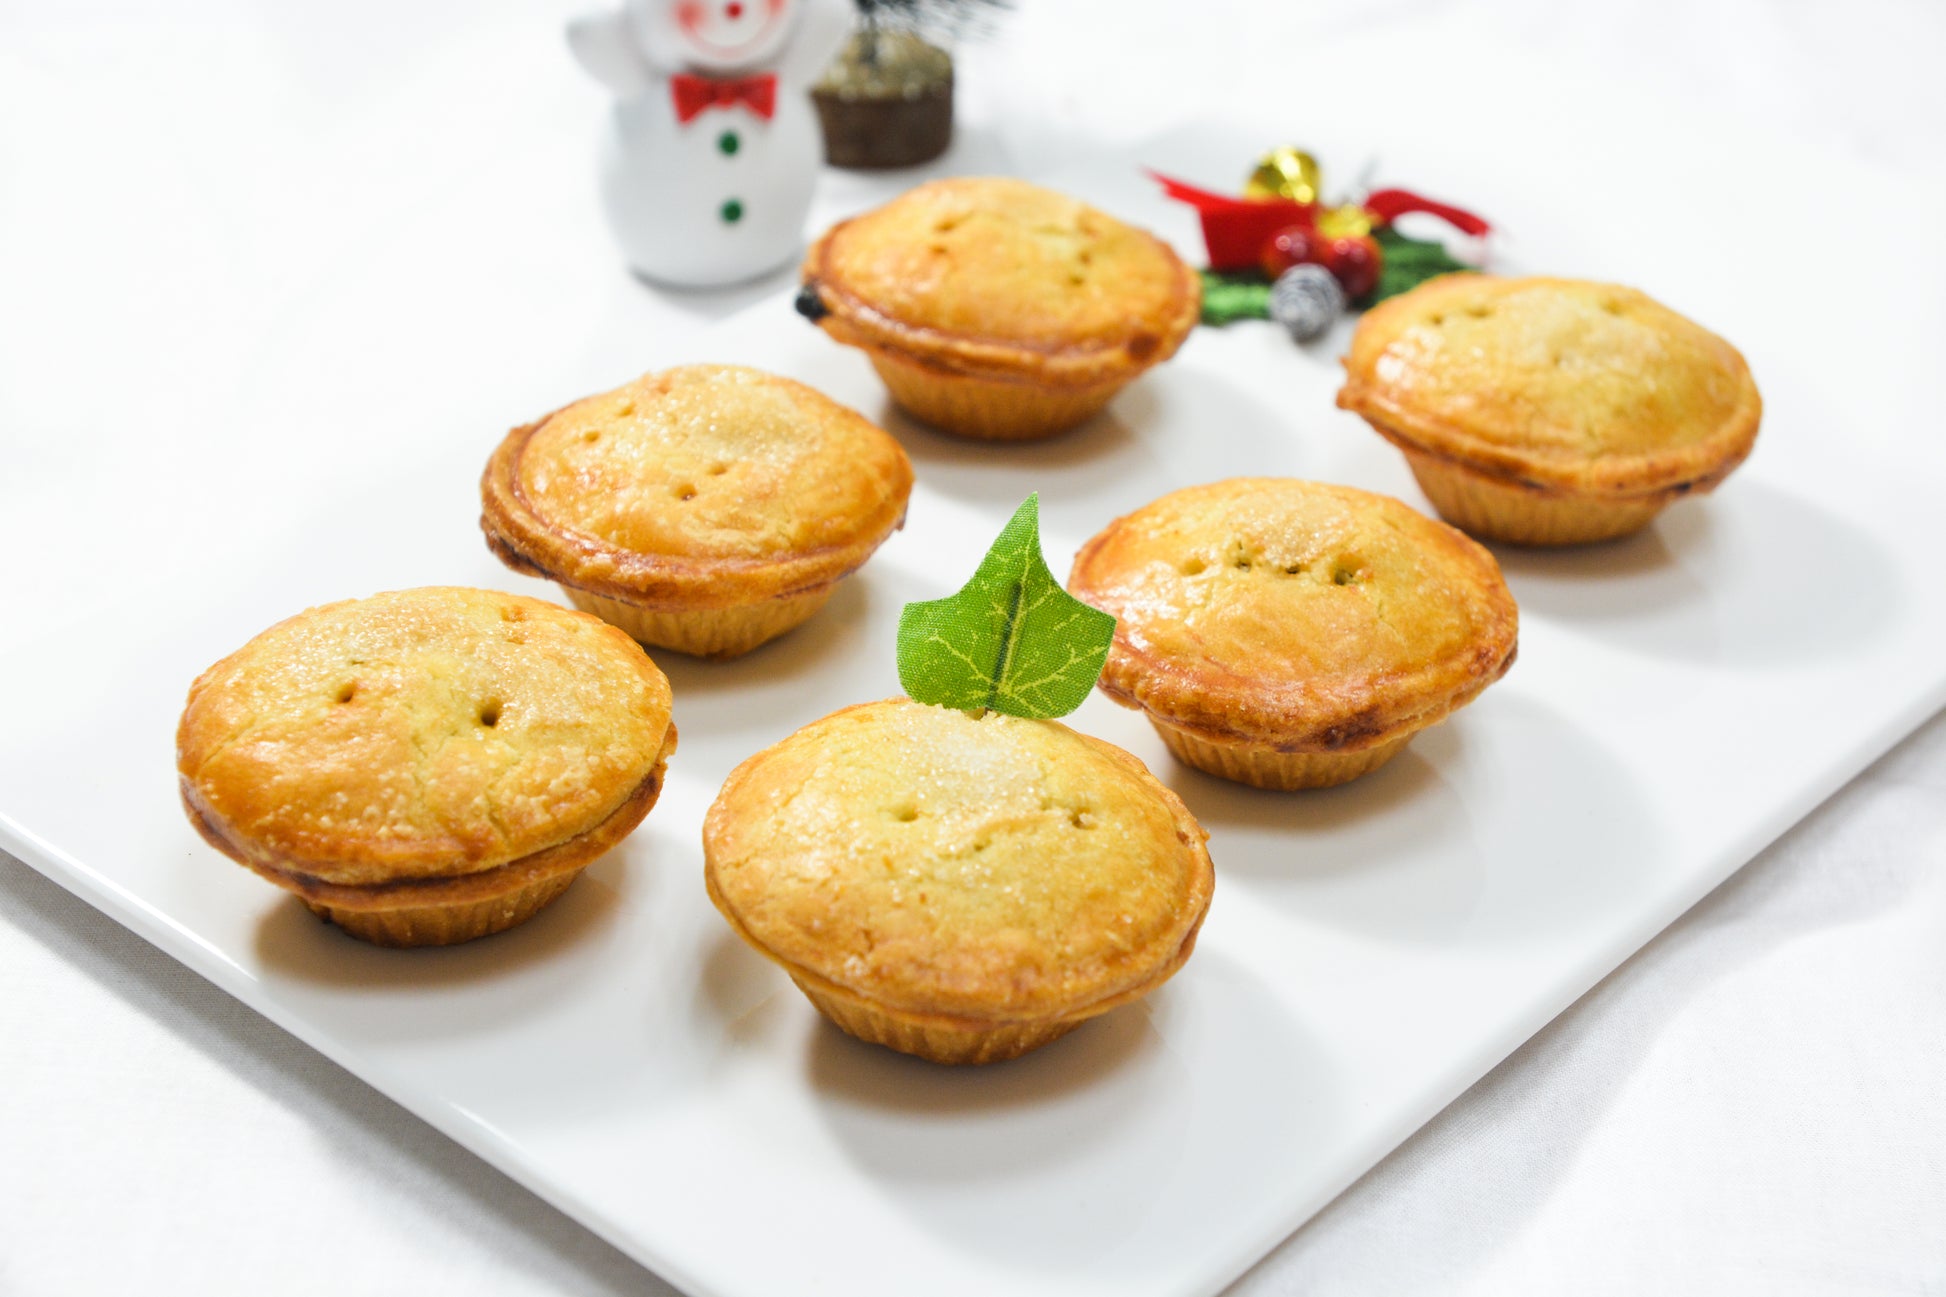 Simply Good Pies Mince Pies, Christmas Mince Pie, Christmas Mince Pie Singapore, Christmas Mince Pie SG delivery, Christmas Mince Pie sg delivery, Best Mince Pie SG, Best mince pies delivery